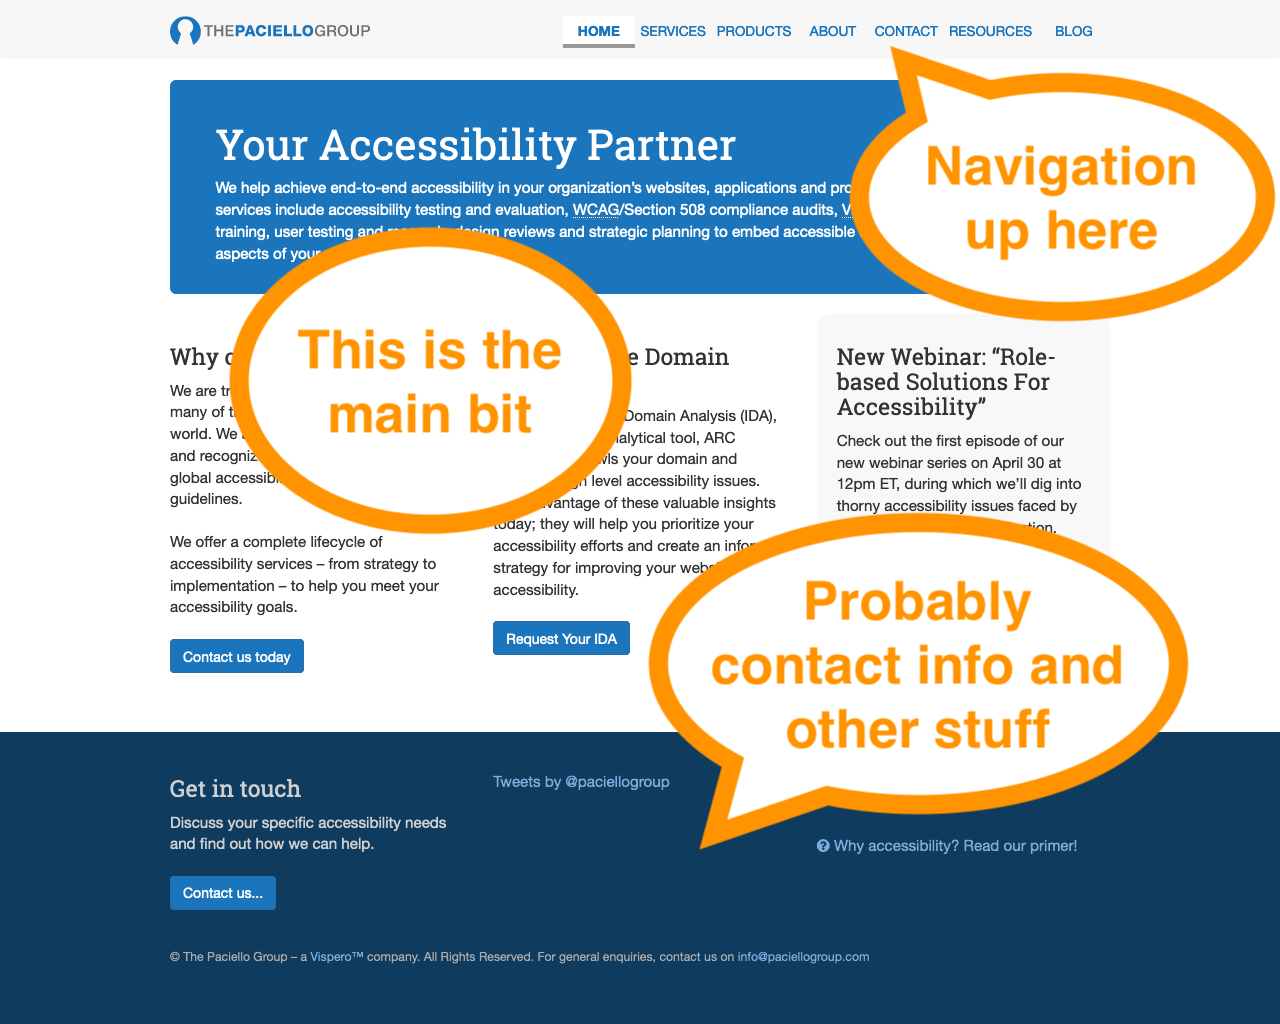 The Paciello Group home page with visually-apparent page areas called out in speech bubbles